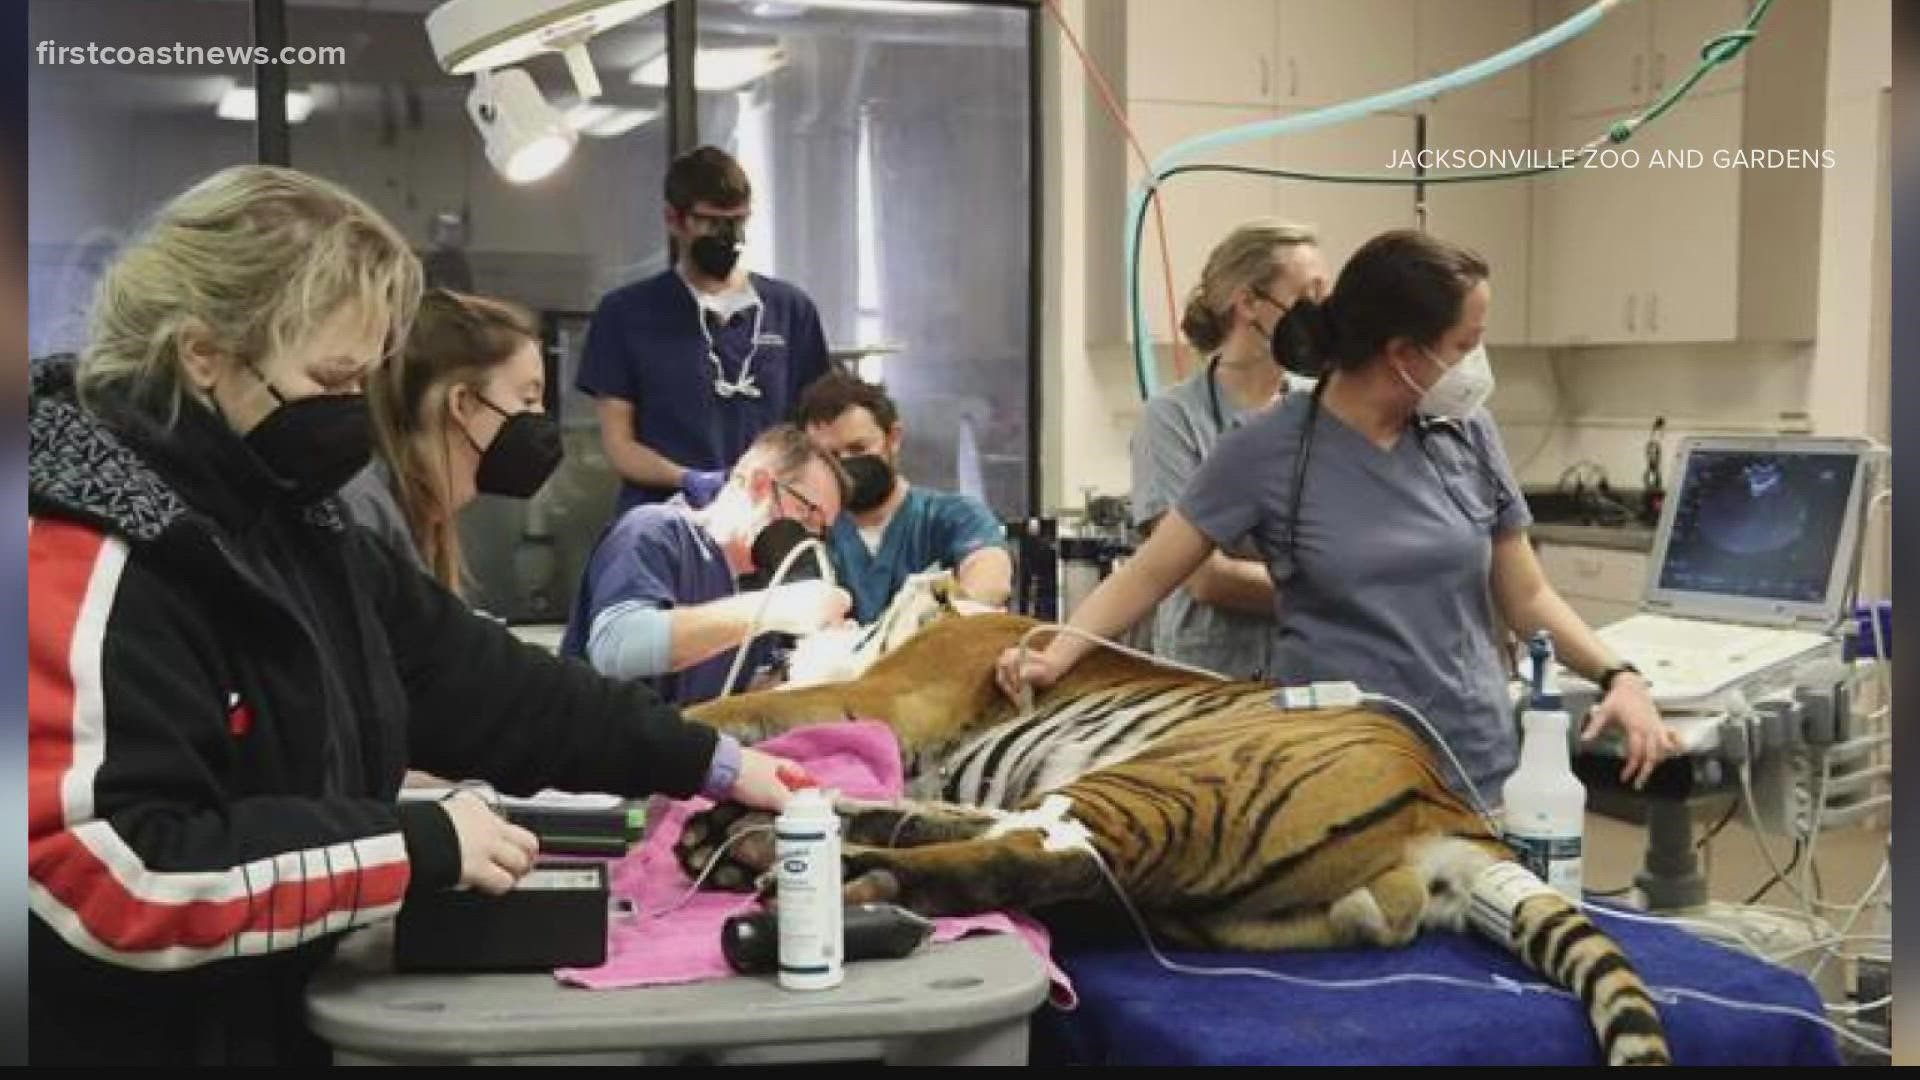 The Jacksonville Zoo and Garden's tiger Jaya is getting all cleaned up before heading to his new home in Arkansas.